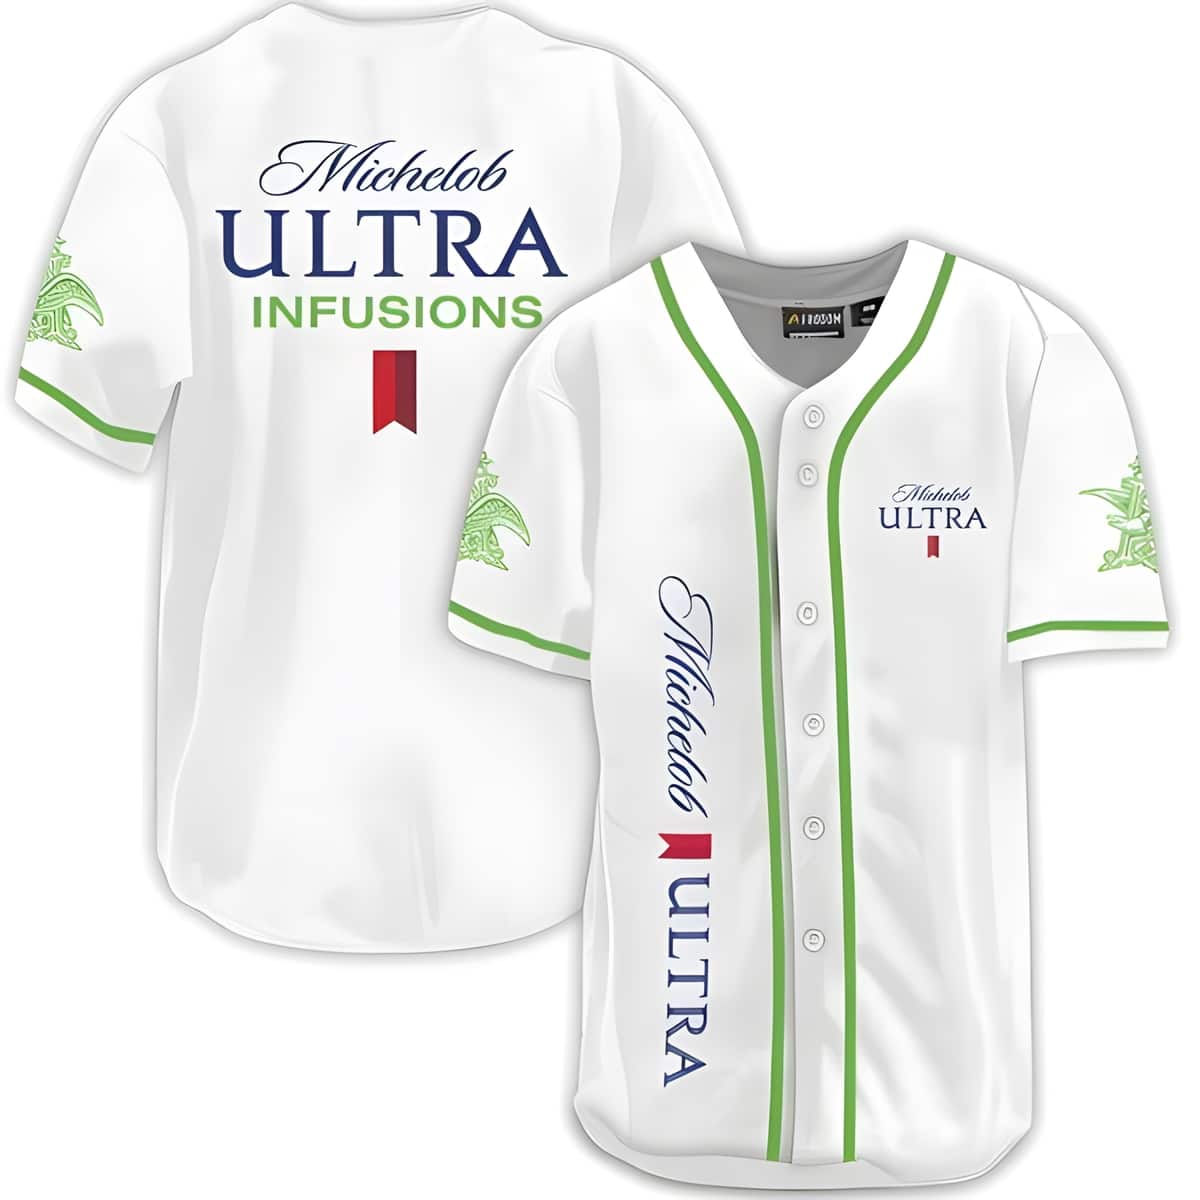 Michelob ULTRA Baseball Jersey Infusions Lime & Prickly Pear Cactus Gift For Beer Lovers